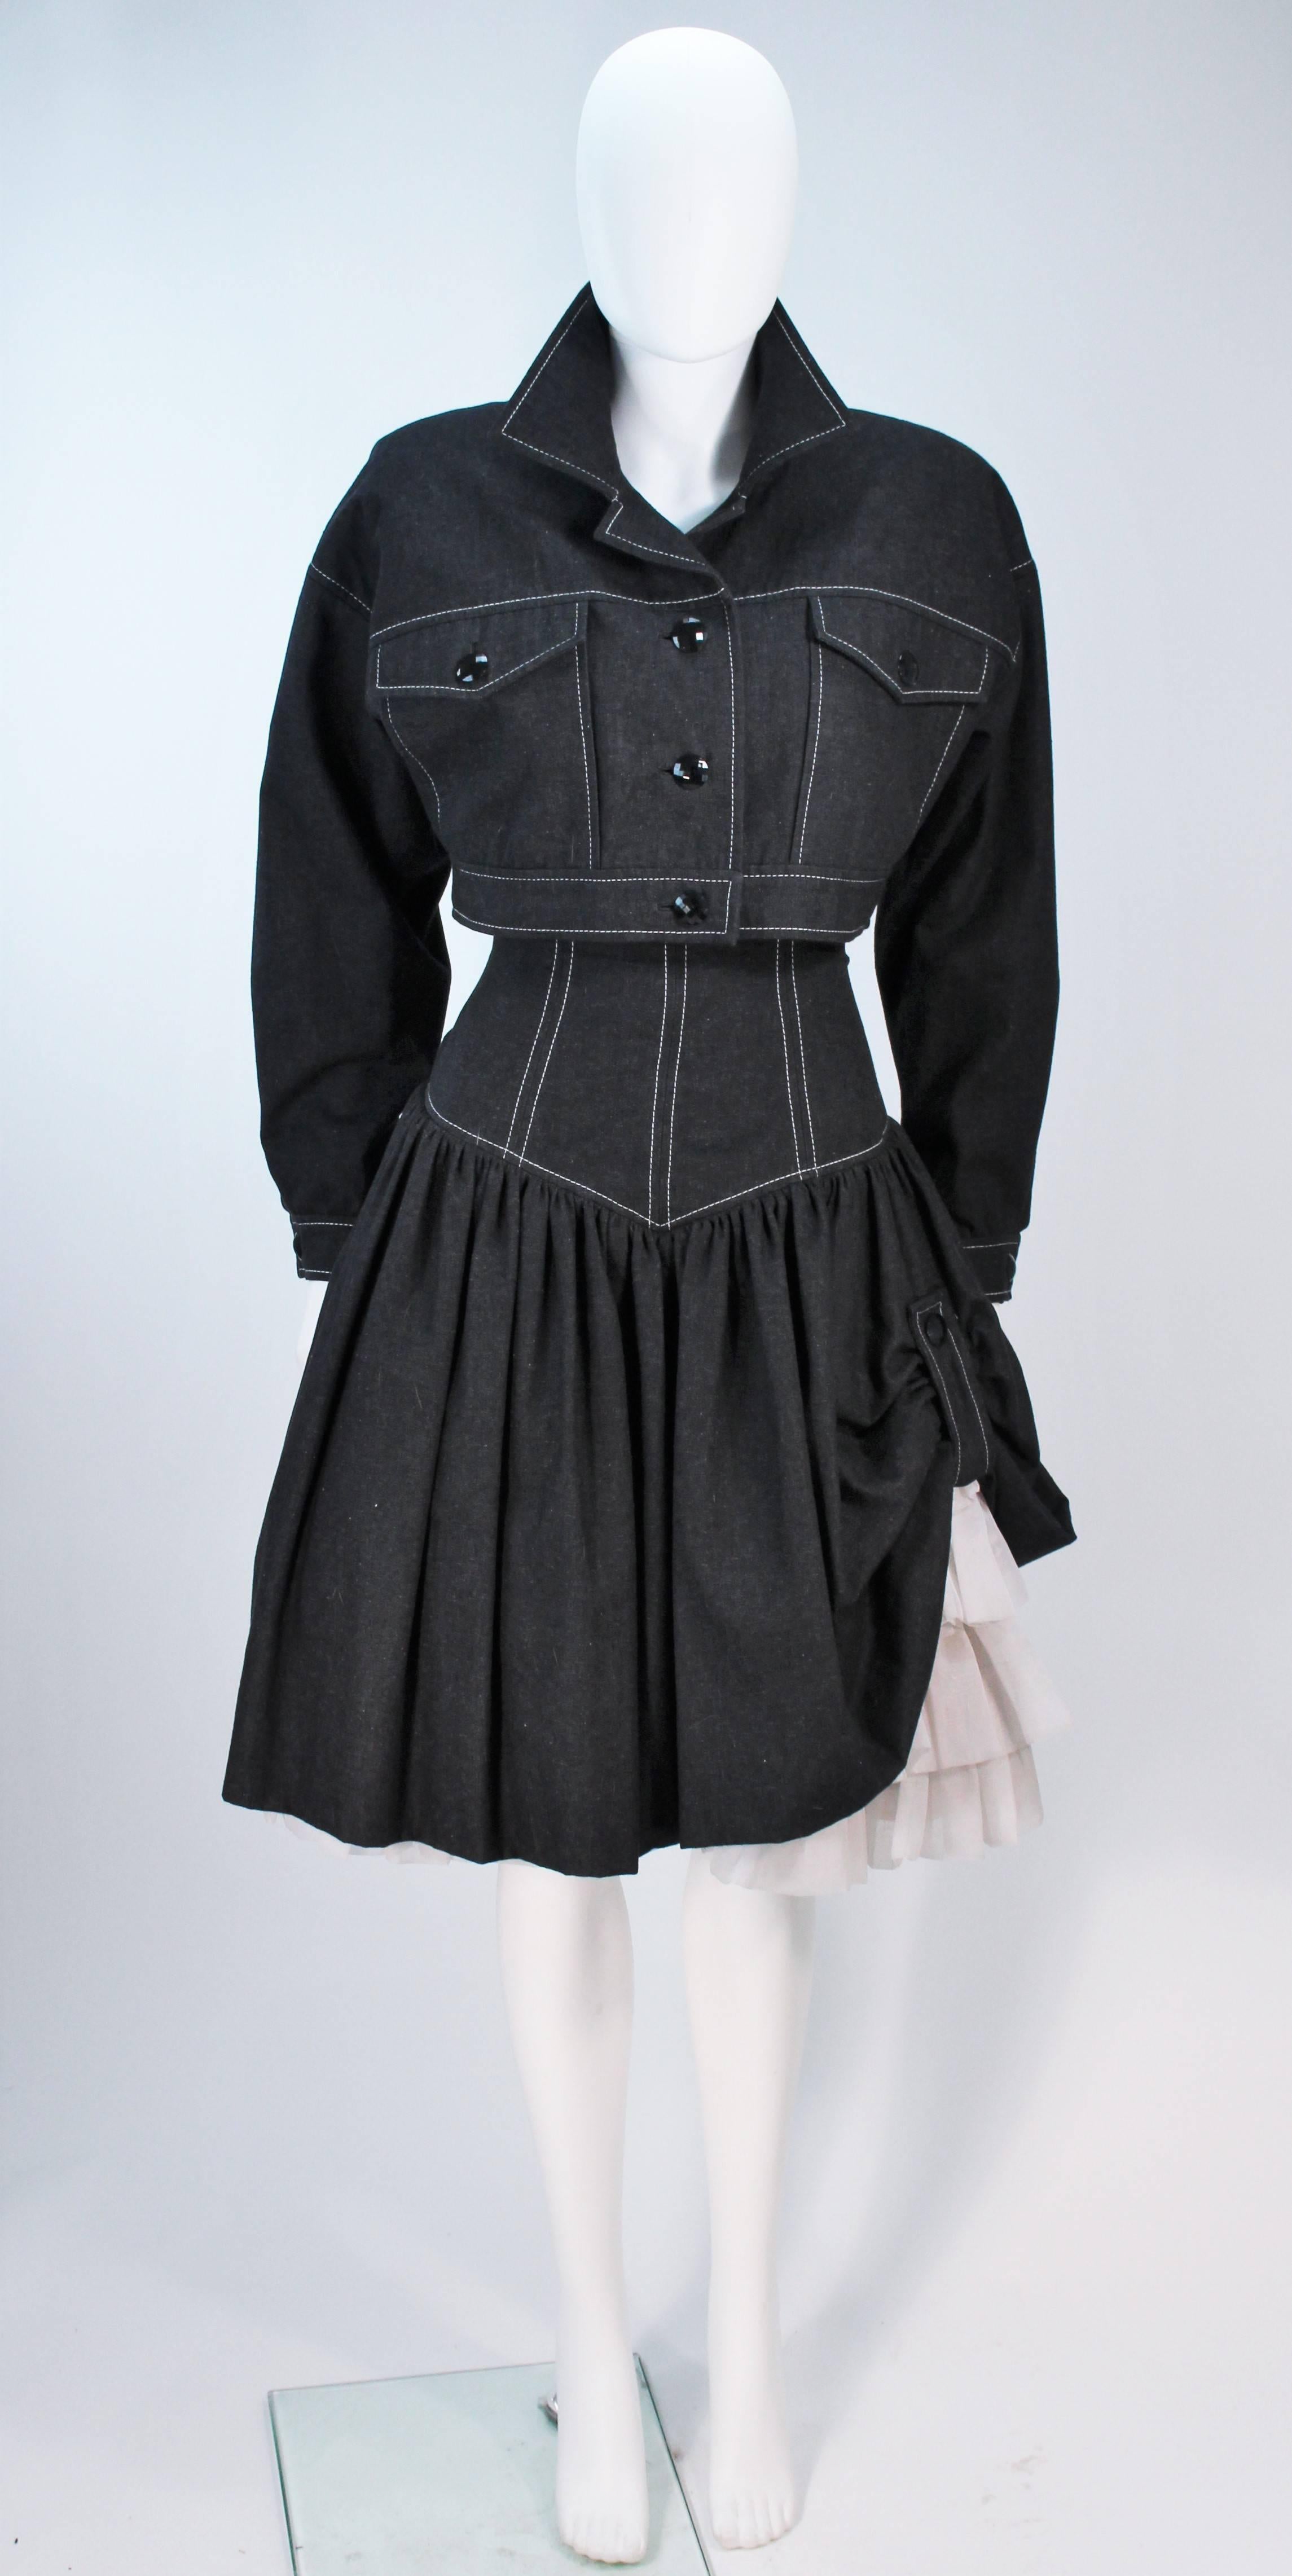 TRAVILLA Black Denim Cocktail Dress with Jacket and White Stitching Size 8 - 10 In Excellent Condition For Sale In Los Angeles, CA